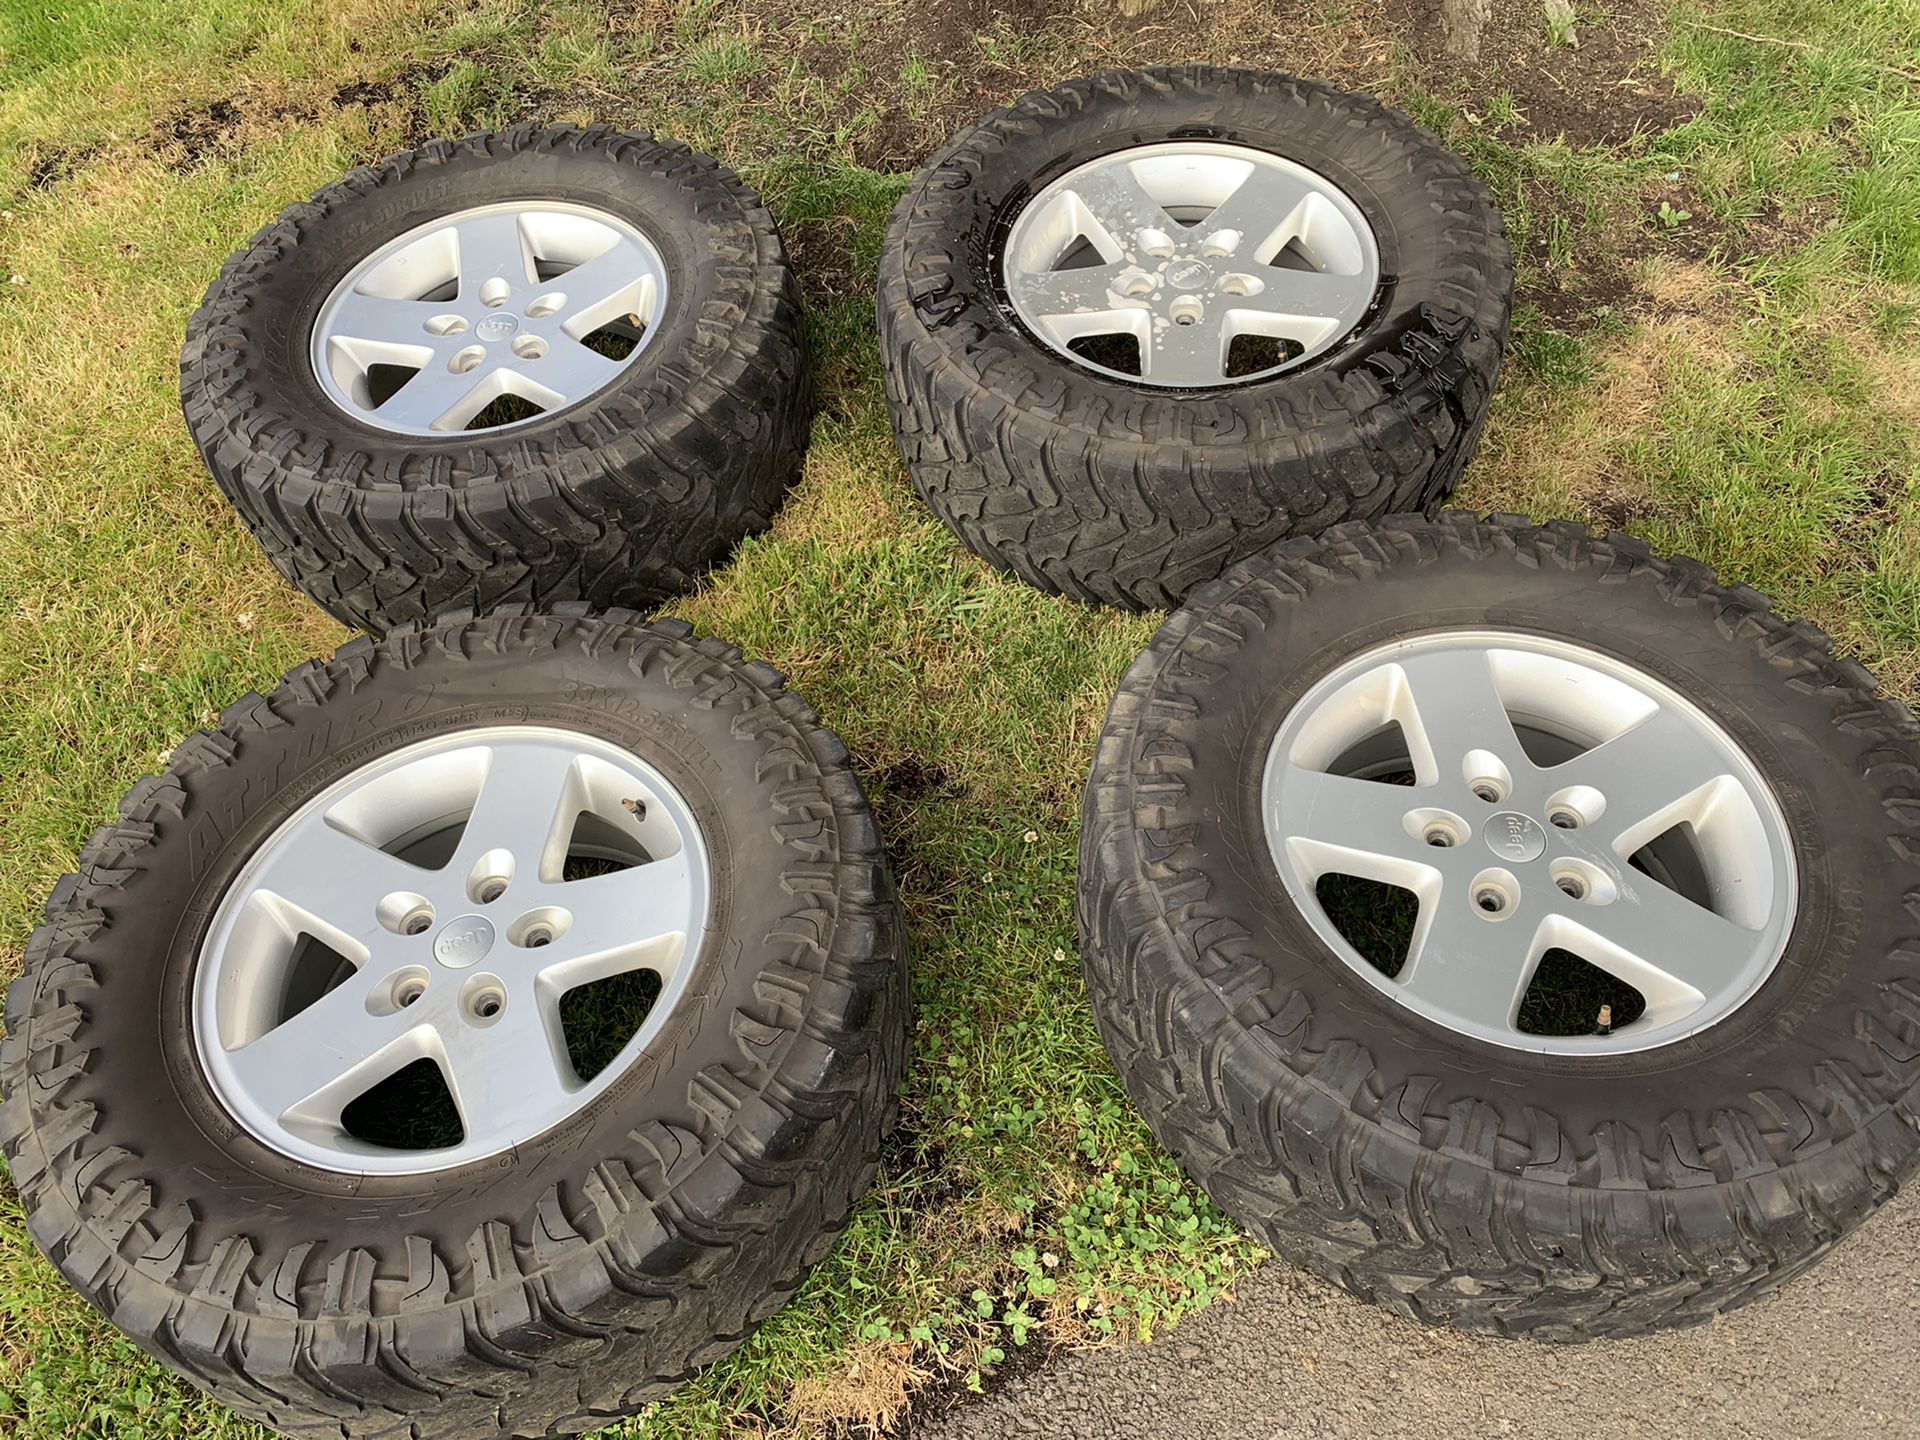 Jeep Gladiator 17 “ wheels and mud tires Atturo Trail Blade 33” tires.